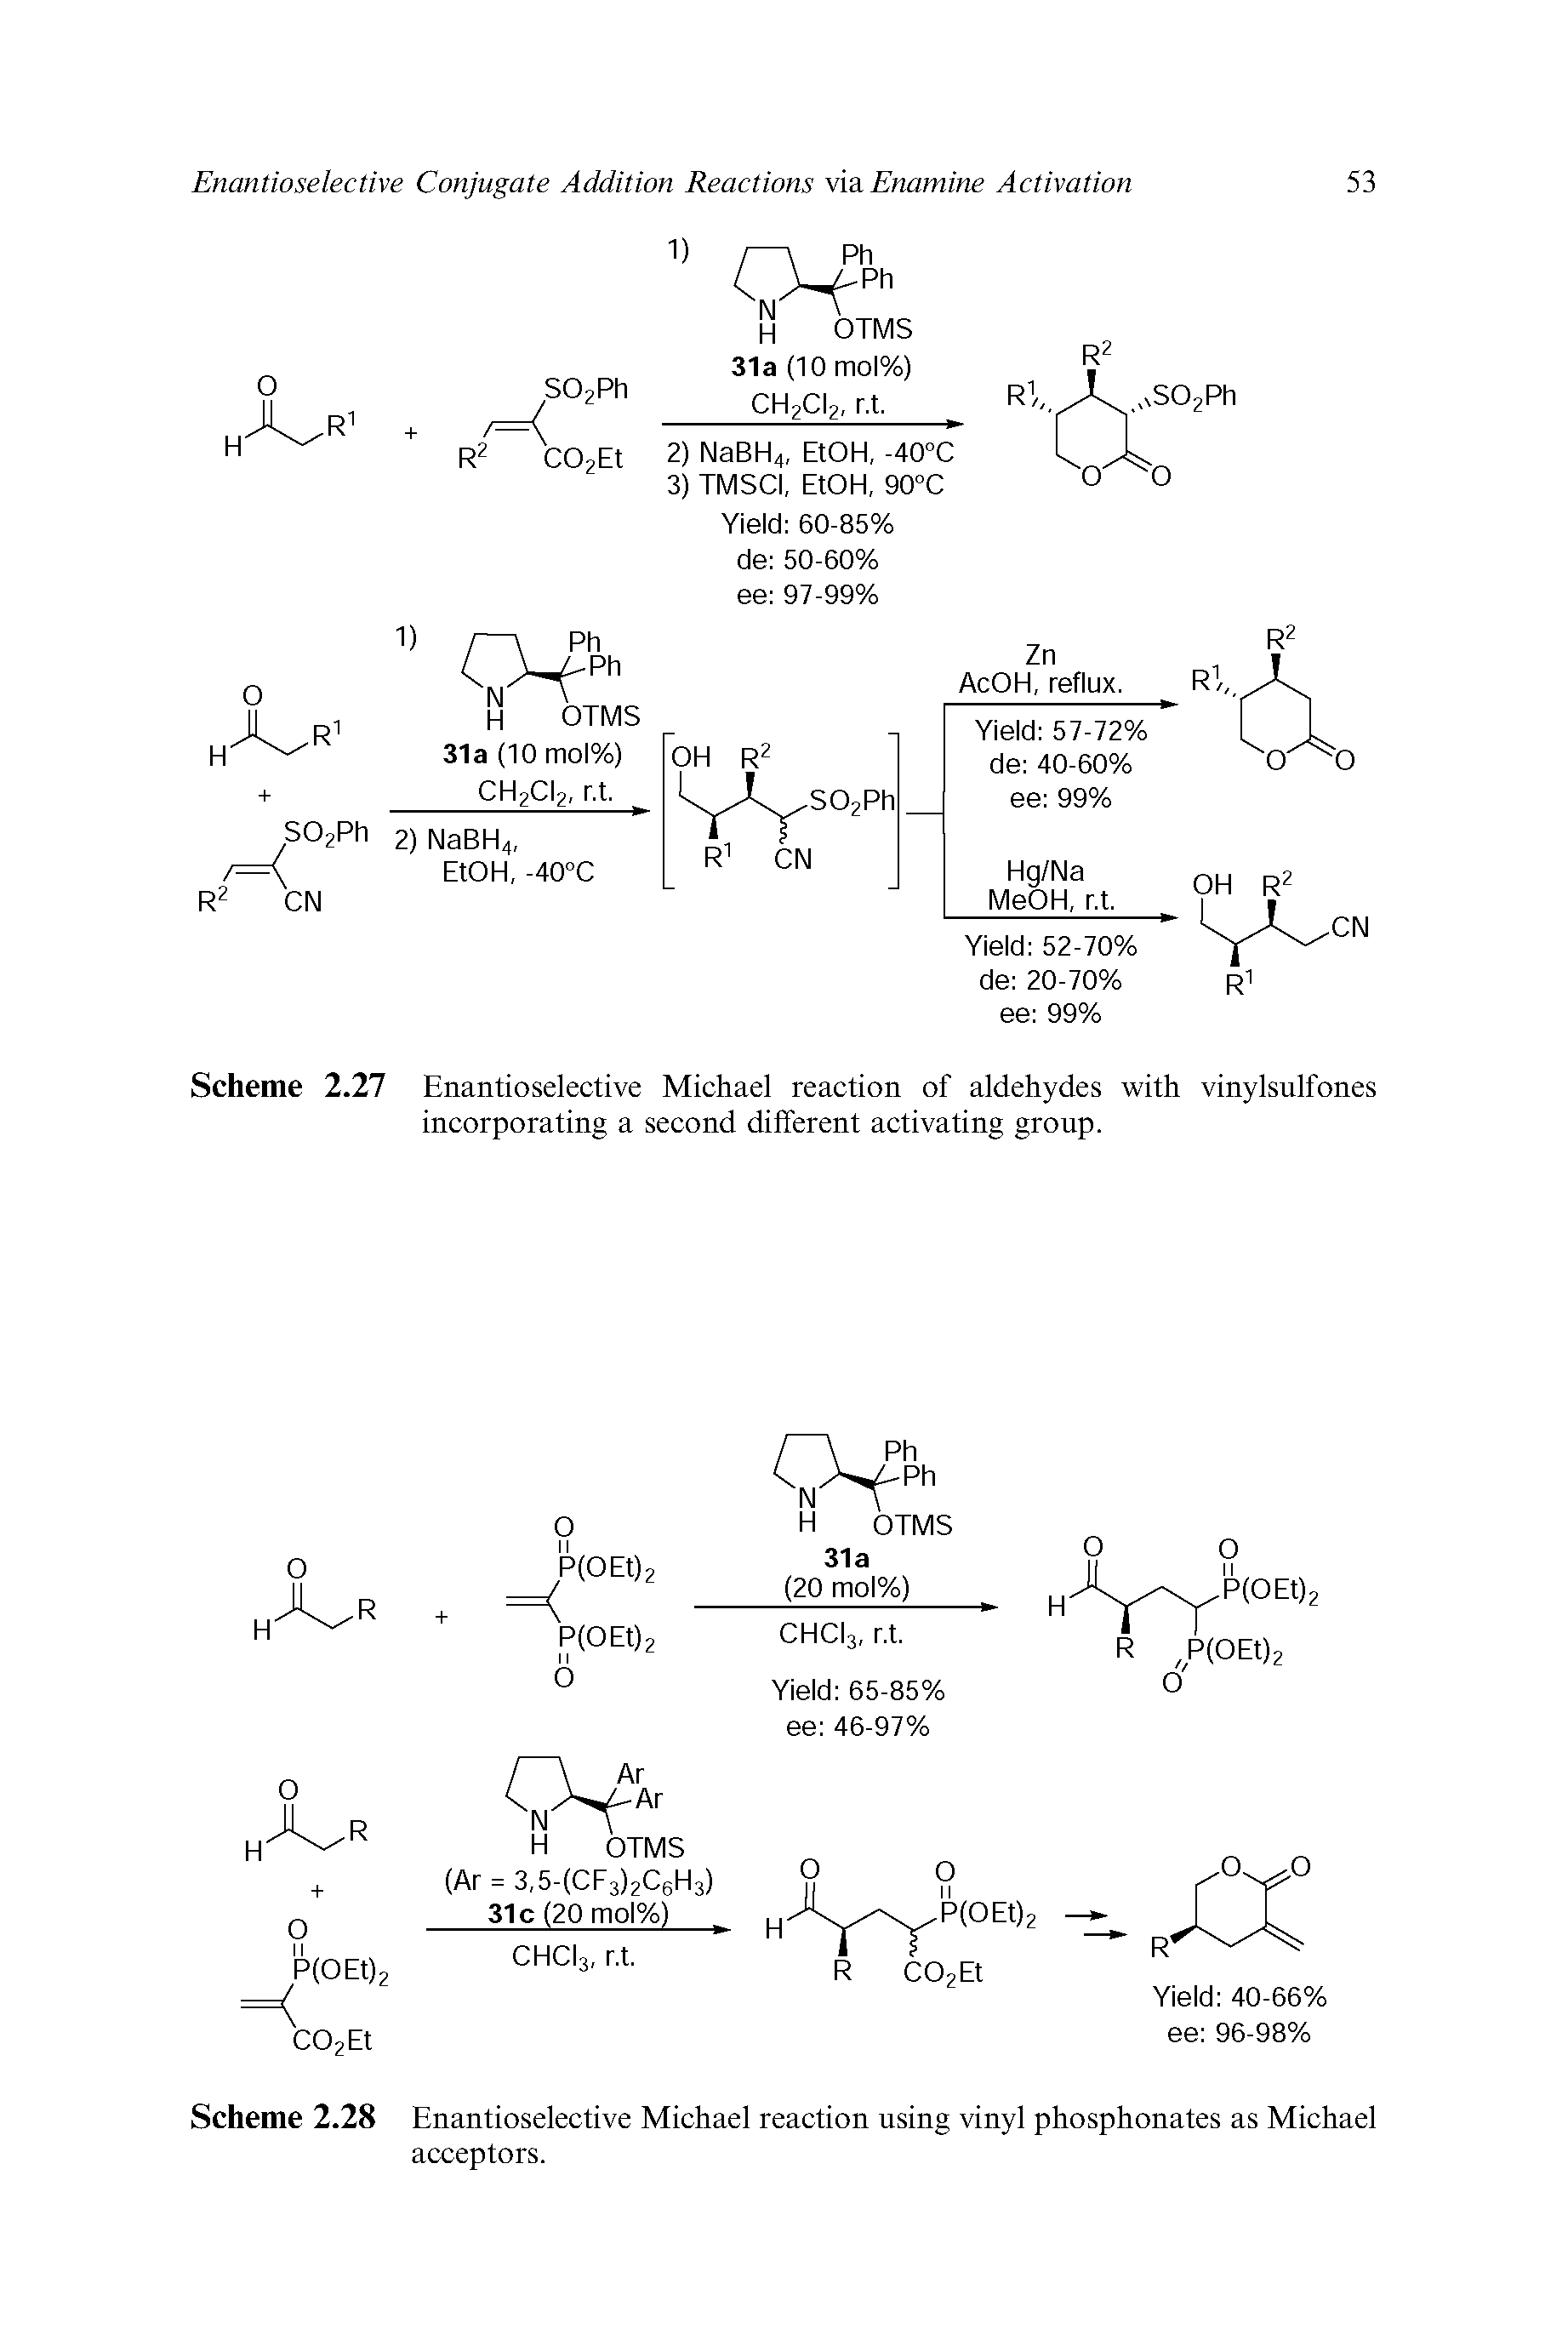 Scheme 2.27 Enantioselective Michael reaction of aldehydes with vinylsulfones incorporating a second different activating group.